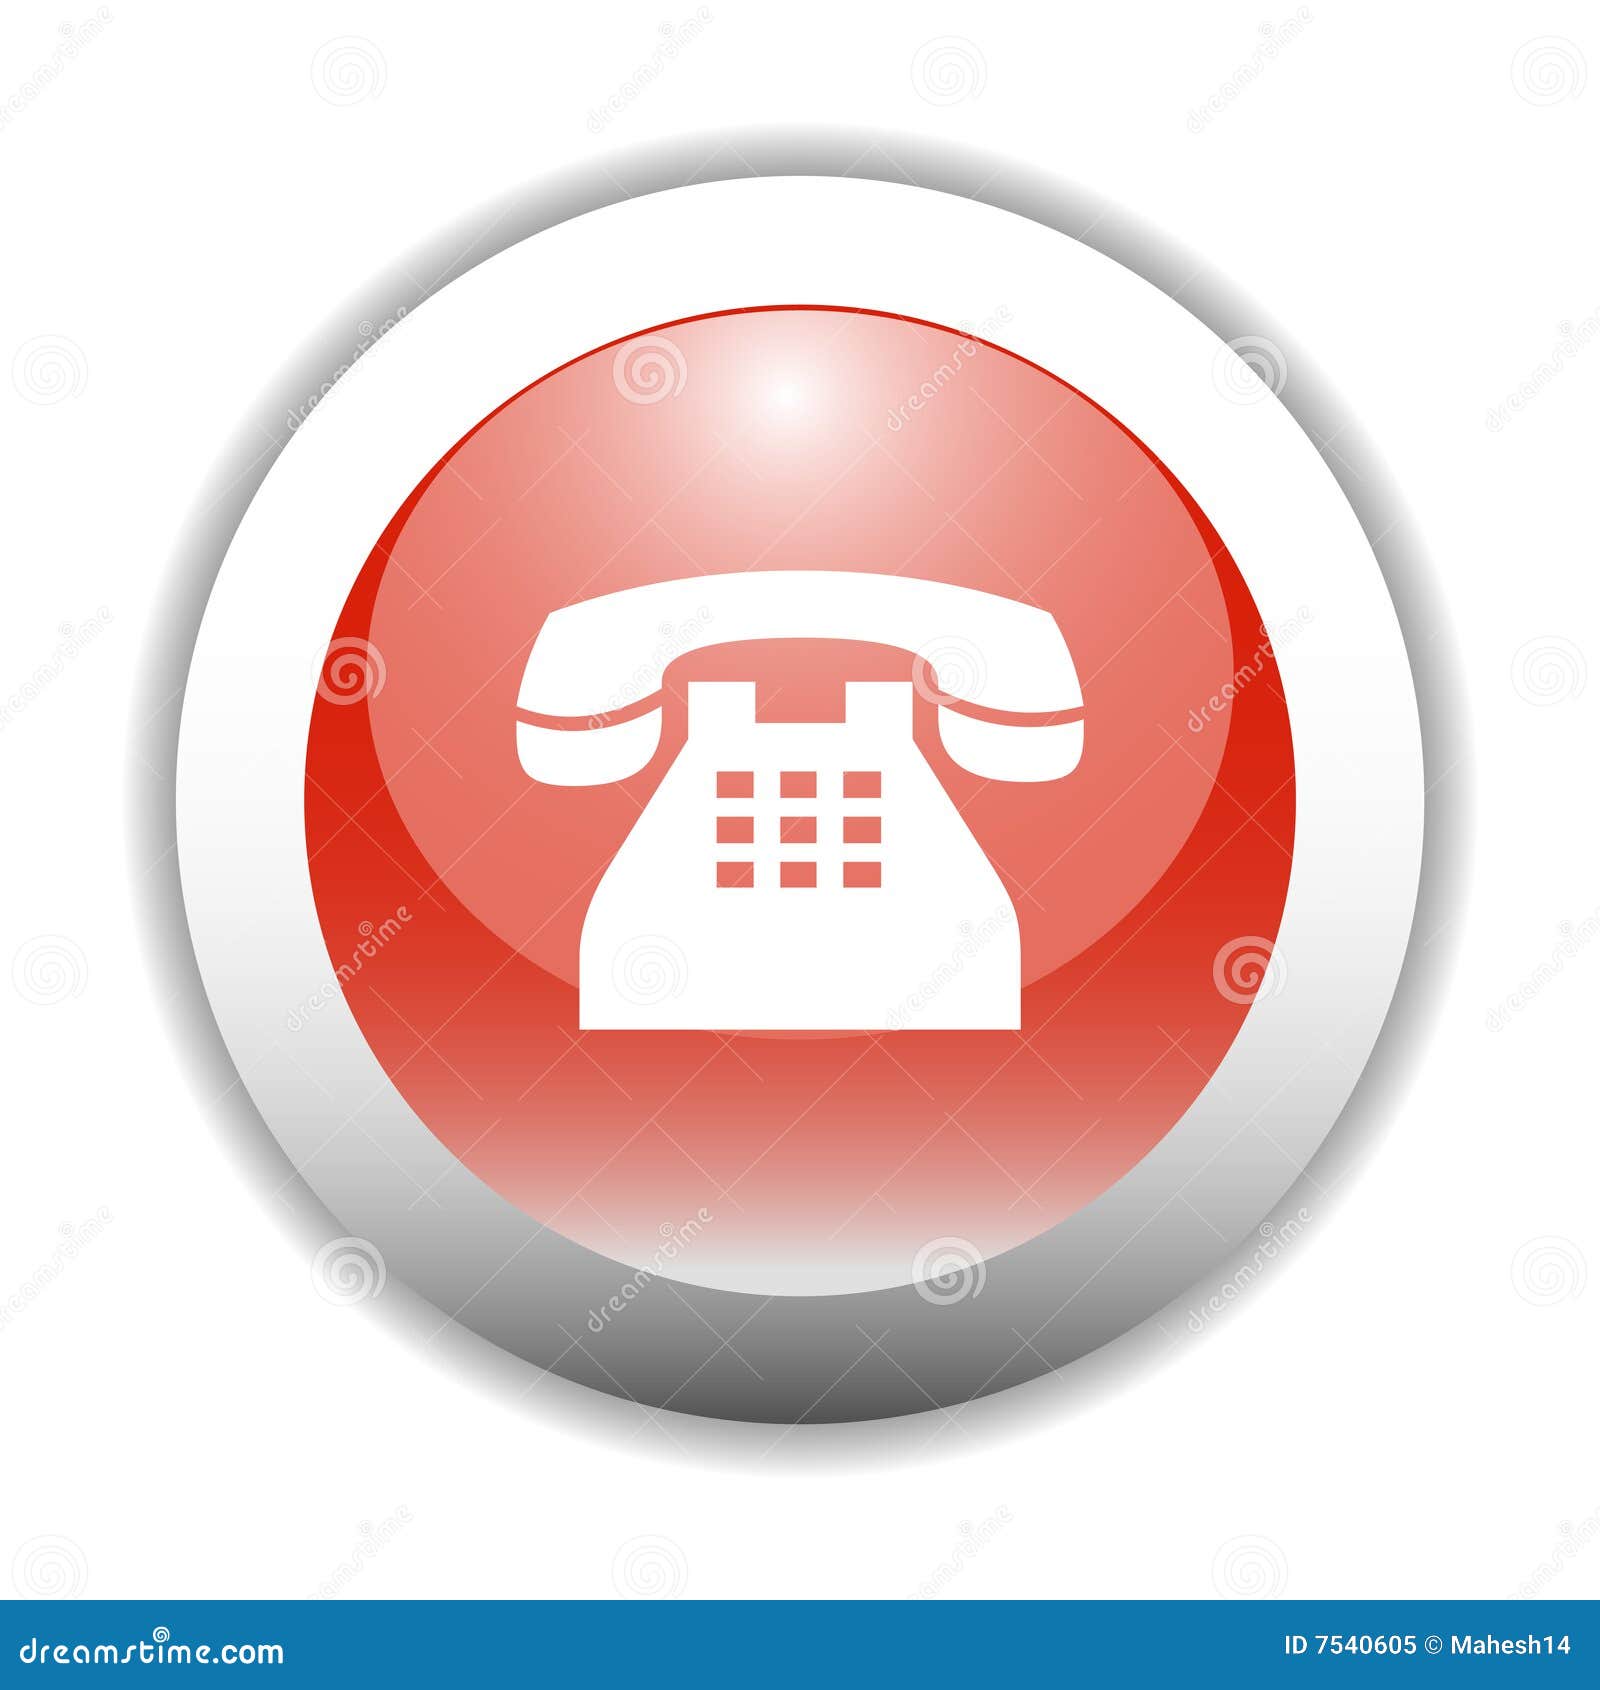 glossy telephone sign icon button